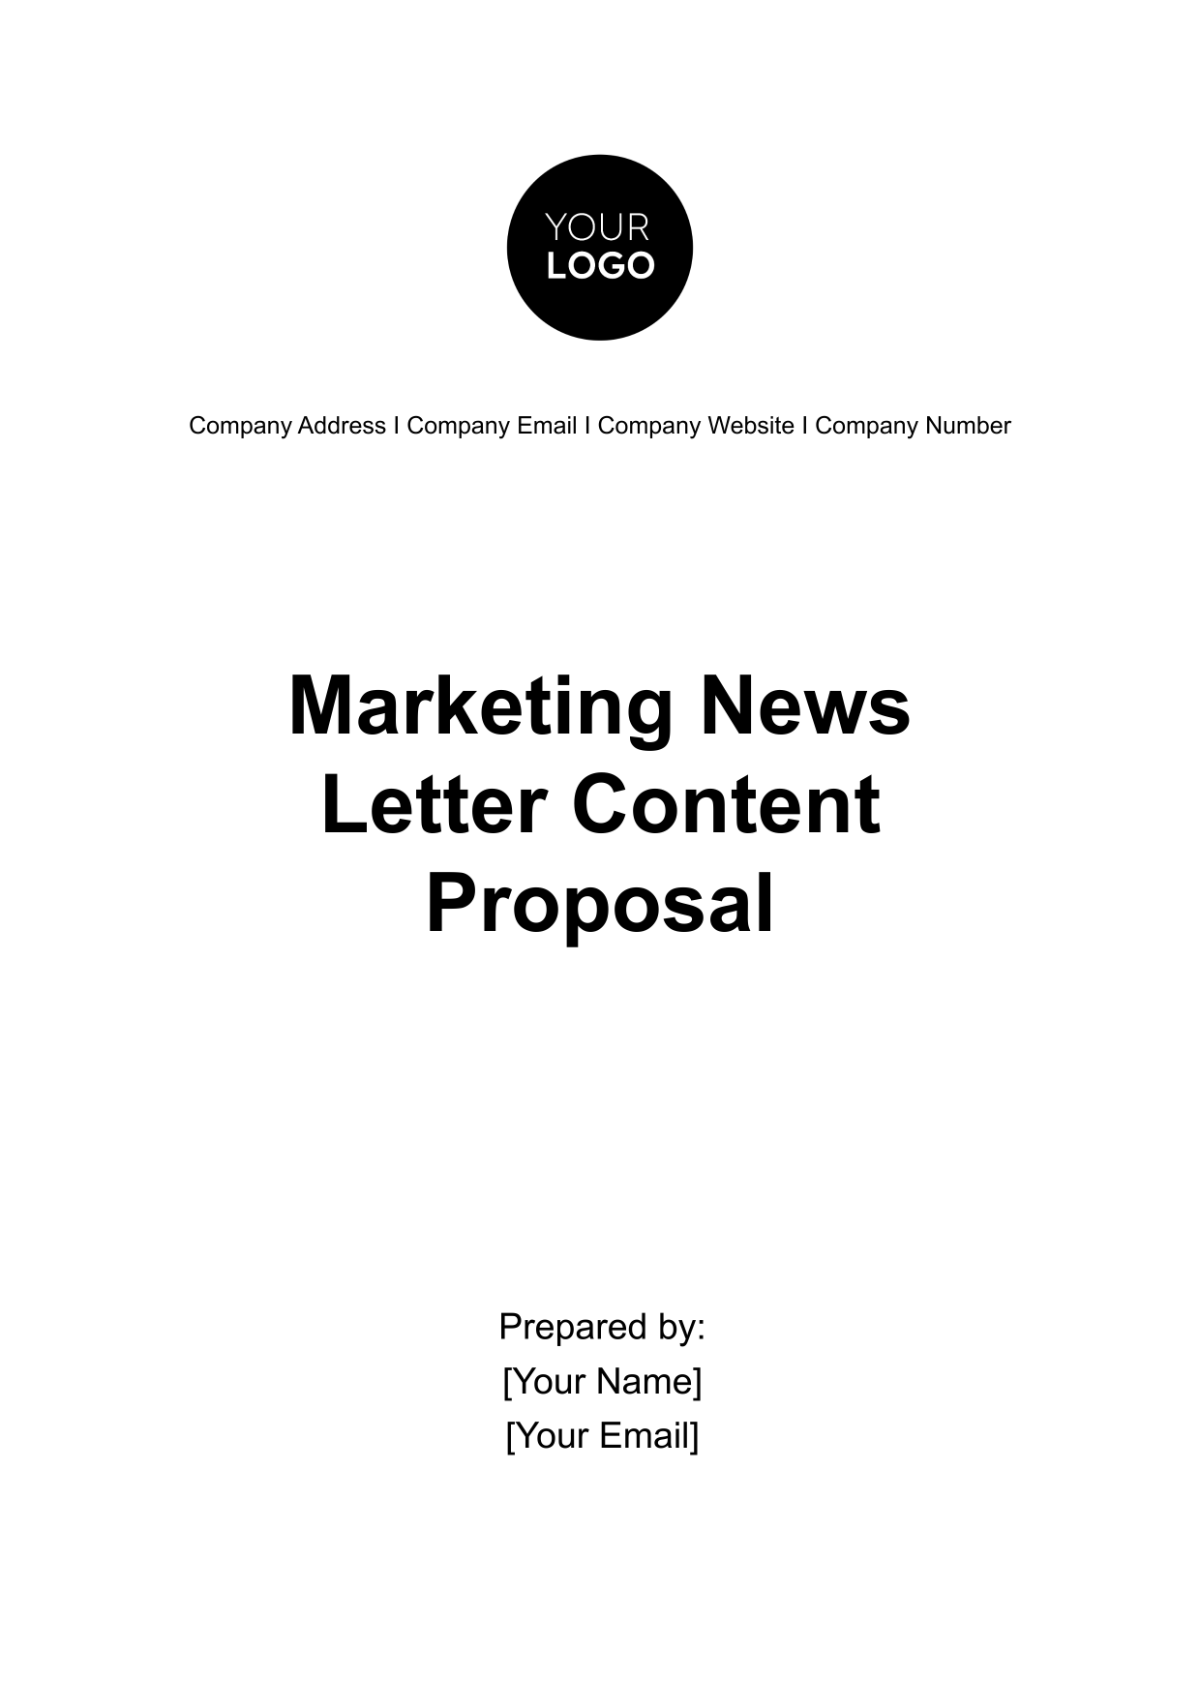 Free Marketing Newsletter Content Proposal Template